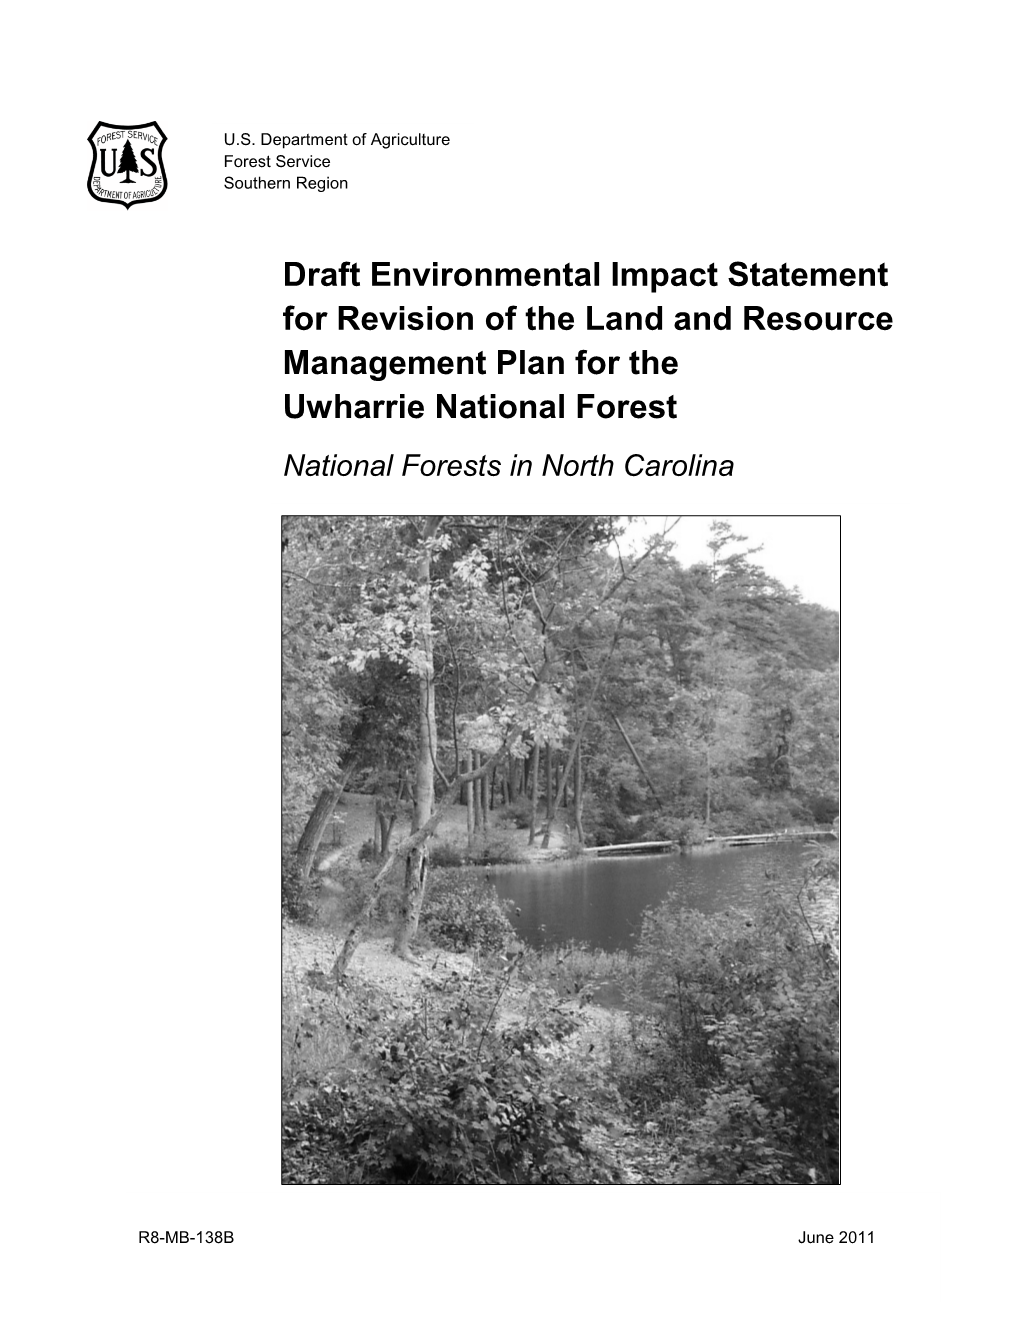 Draft Environmental Impact Statement for Revision of the Land and Resource Management Plan for the Uwharrie National Forest